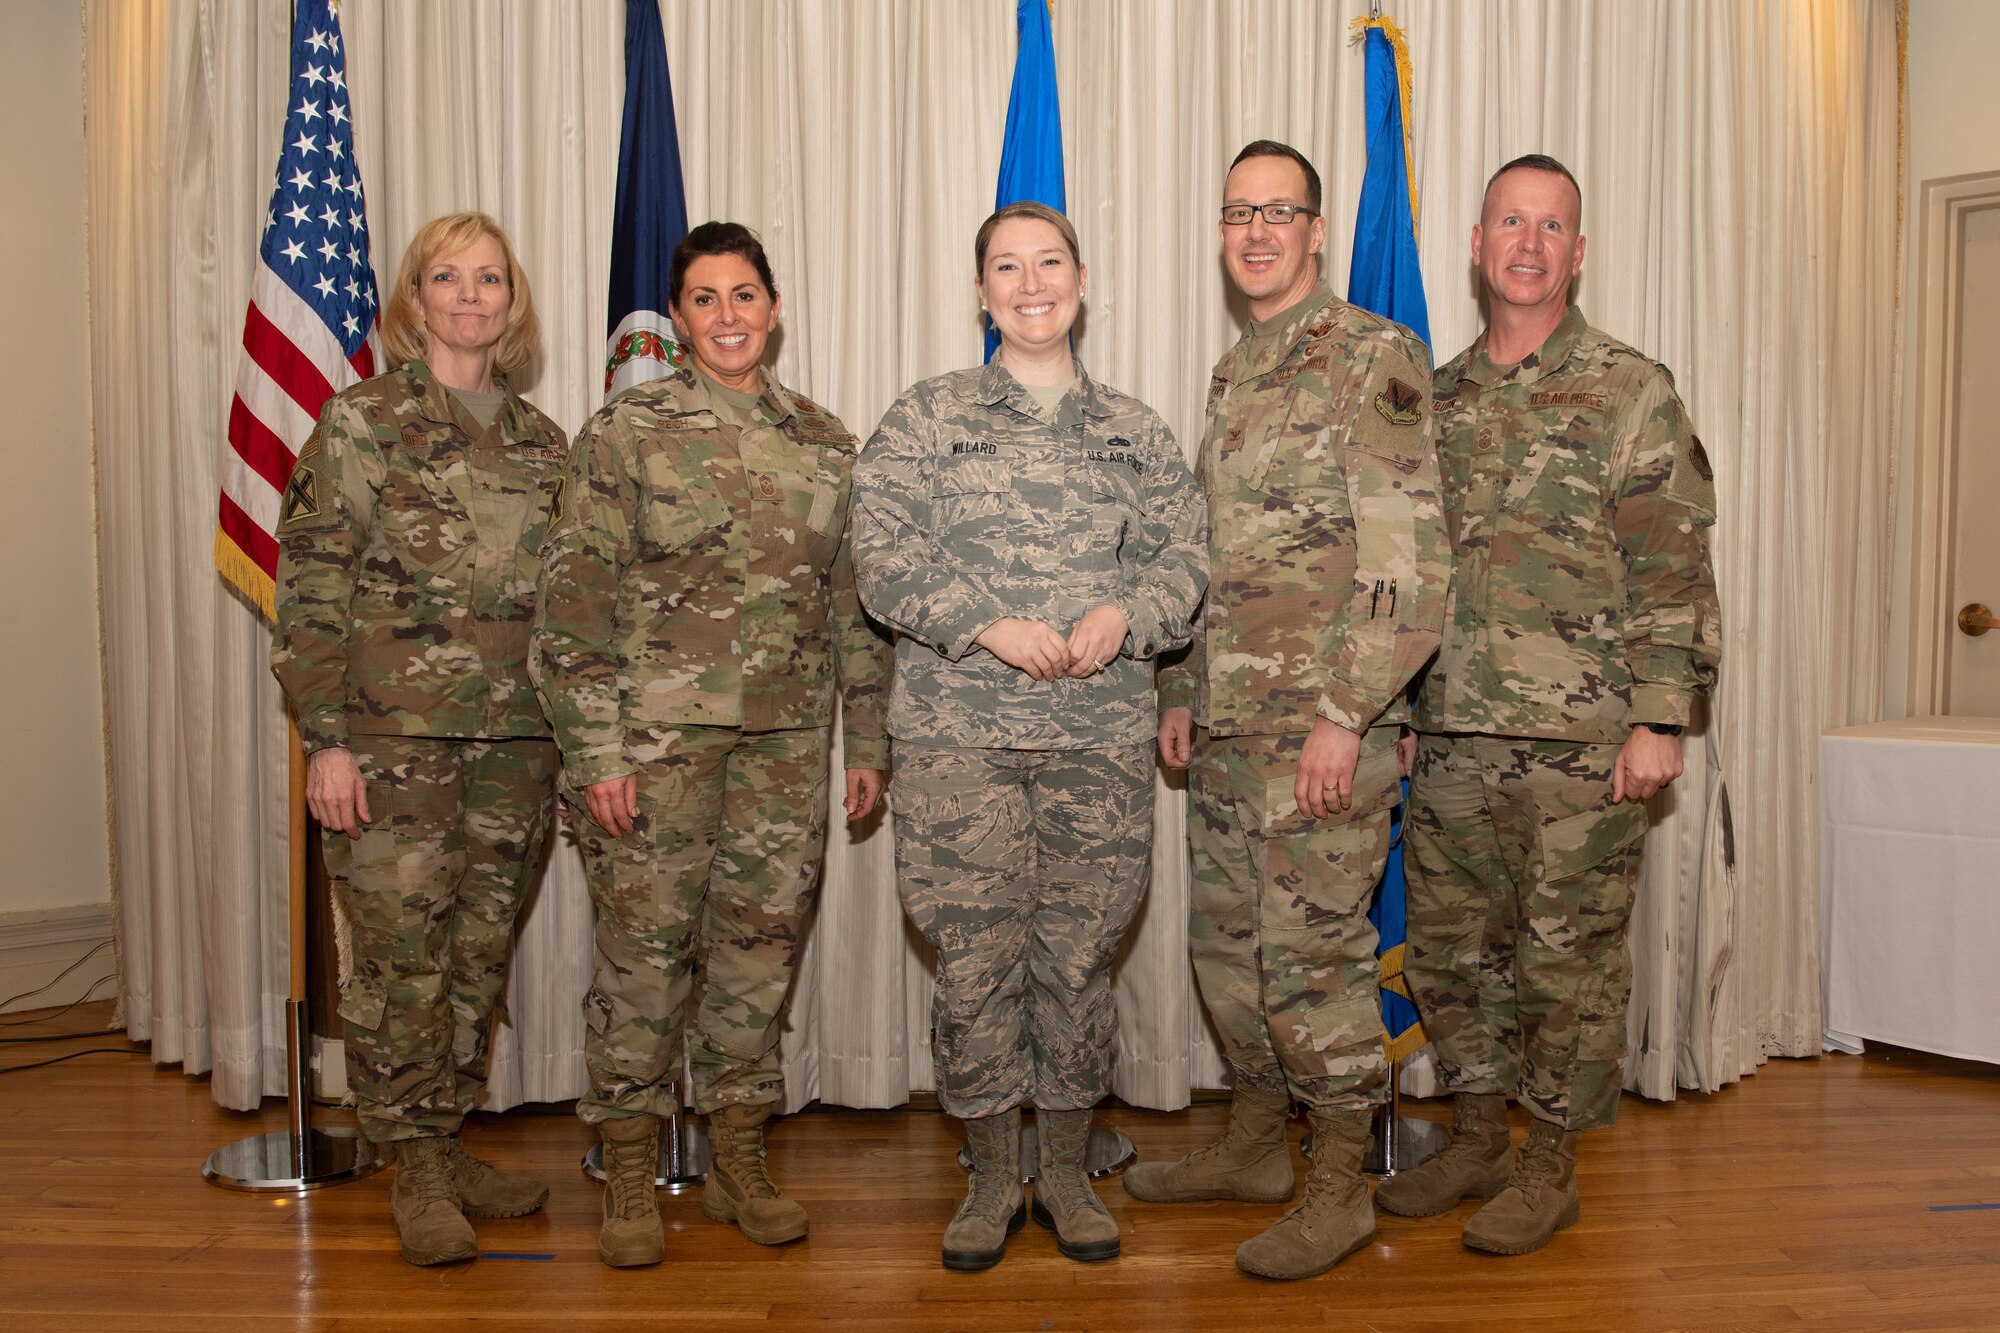 Airmen on a stage pose for a photo with award